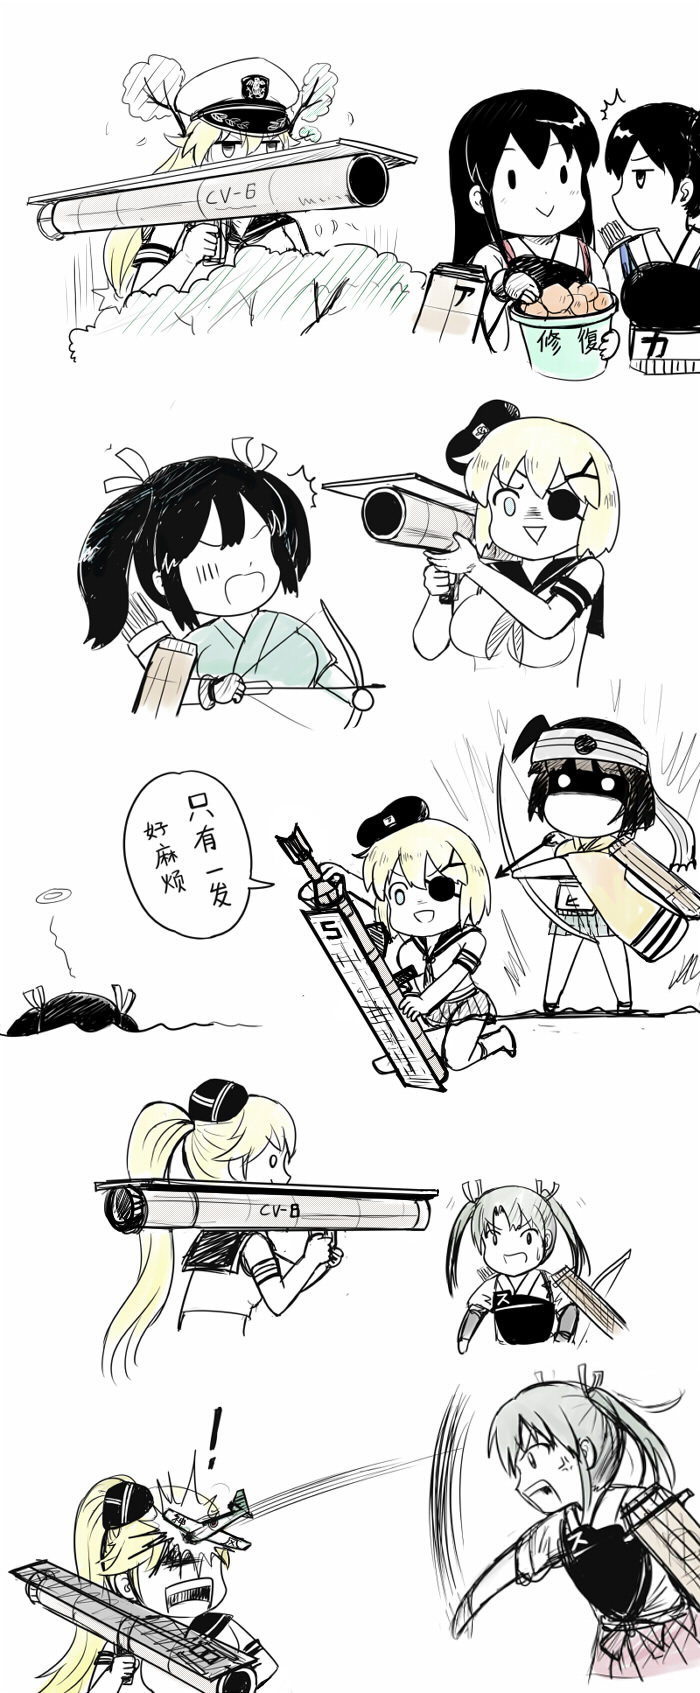 aircraft akagi_(kantai_collection) bazooka black_hair blonde_hair bow_(weapon) brown_hair chinese comic crossover enterprise_(zhan_jian_shao_nyu) eyepatch hat highres hiryuu_(kantai_collection) hornet_(zhan_jian_shao_nyu) japanese_clothes kaga_(kantai_collection) kantai_collection long_hair short_hair souryuu_(kantai_collection) throwing translation_request twintails weapon y.ssanoha yorktown_(zhan_jian_shao_nyu) zhan_jian_shao_nyu zuikaku_(kantai_collection)